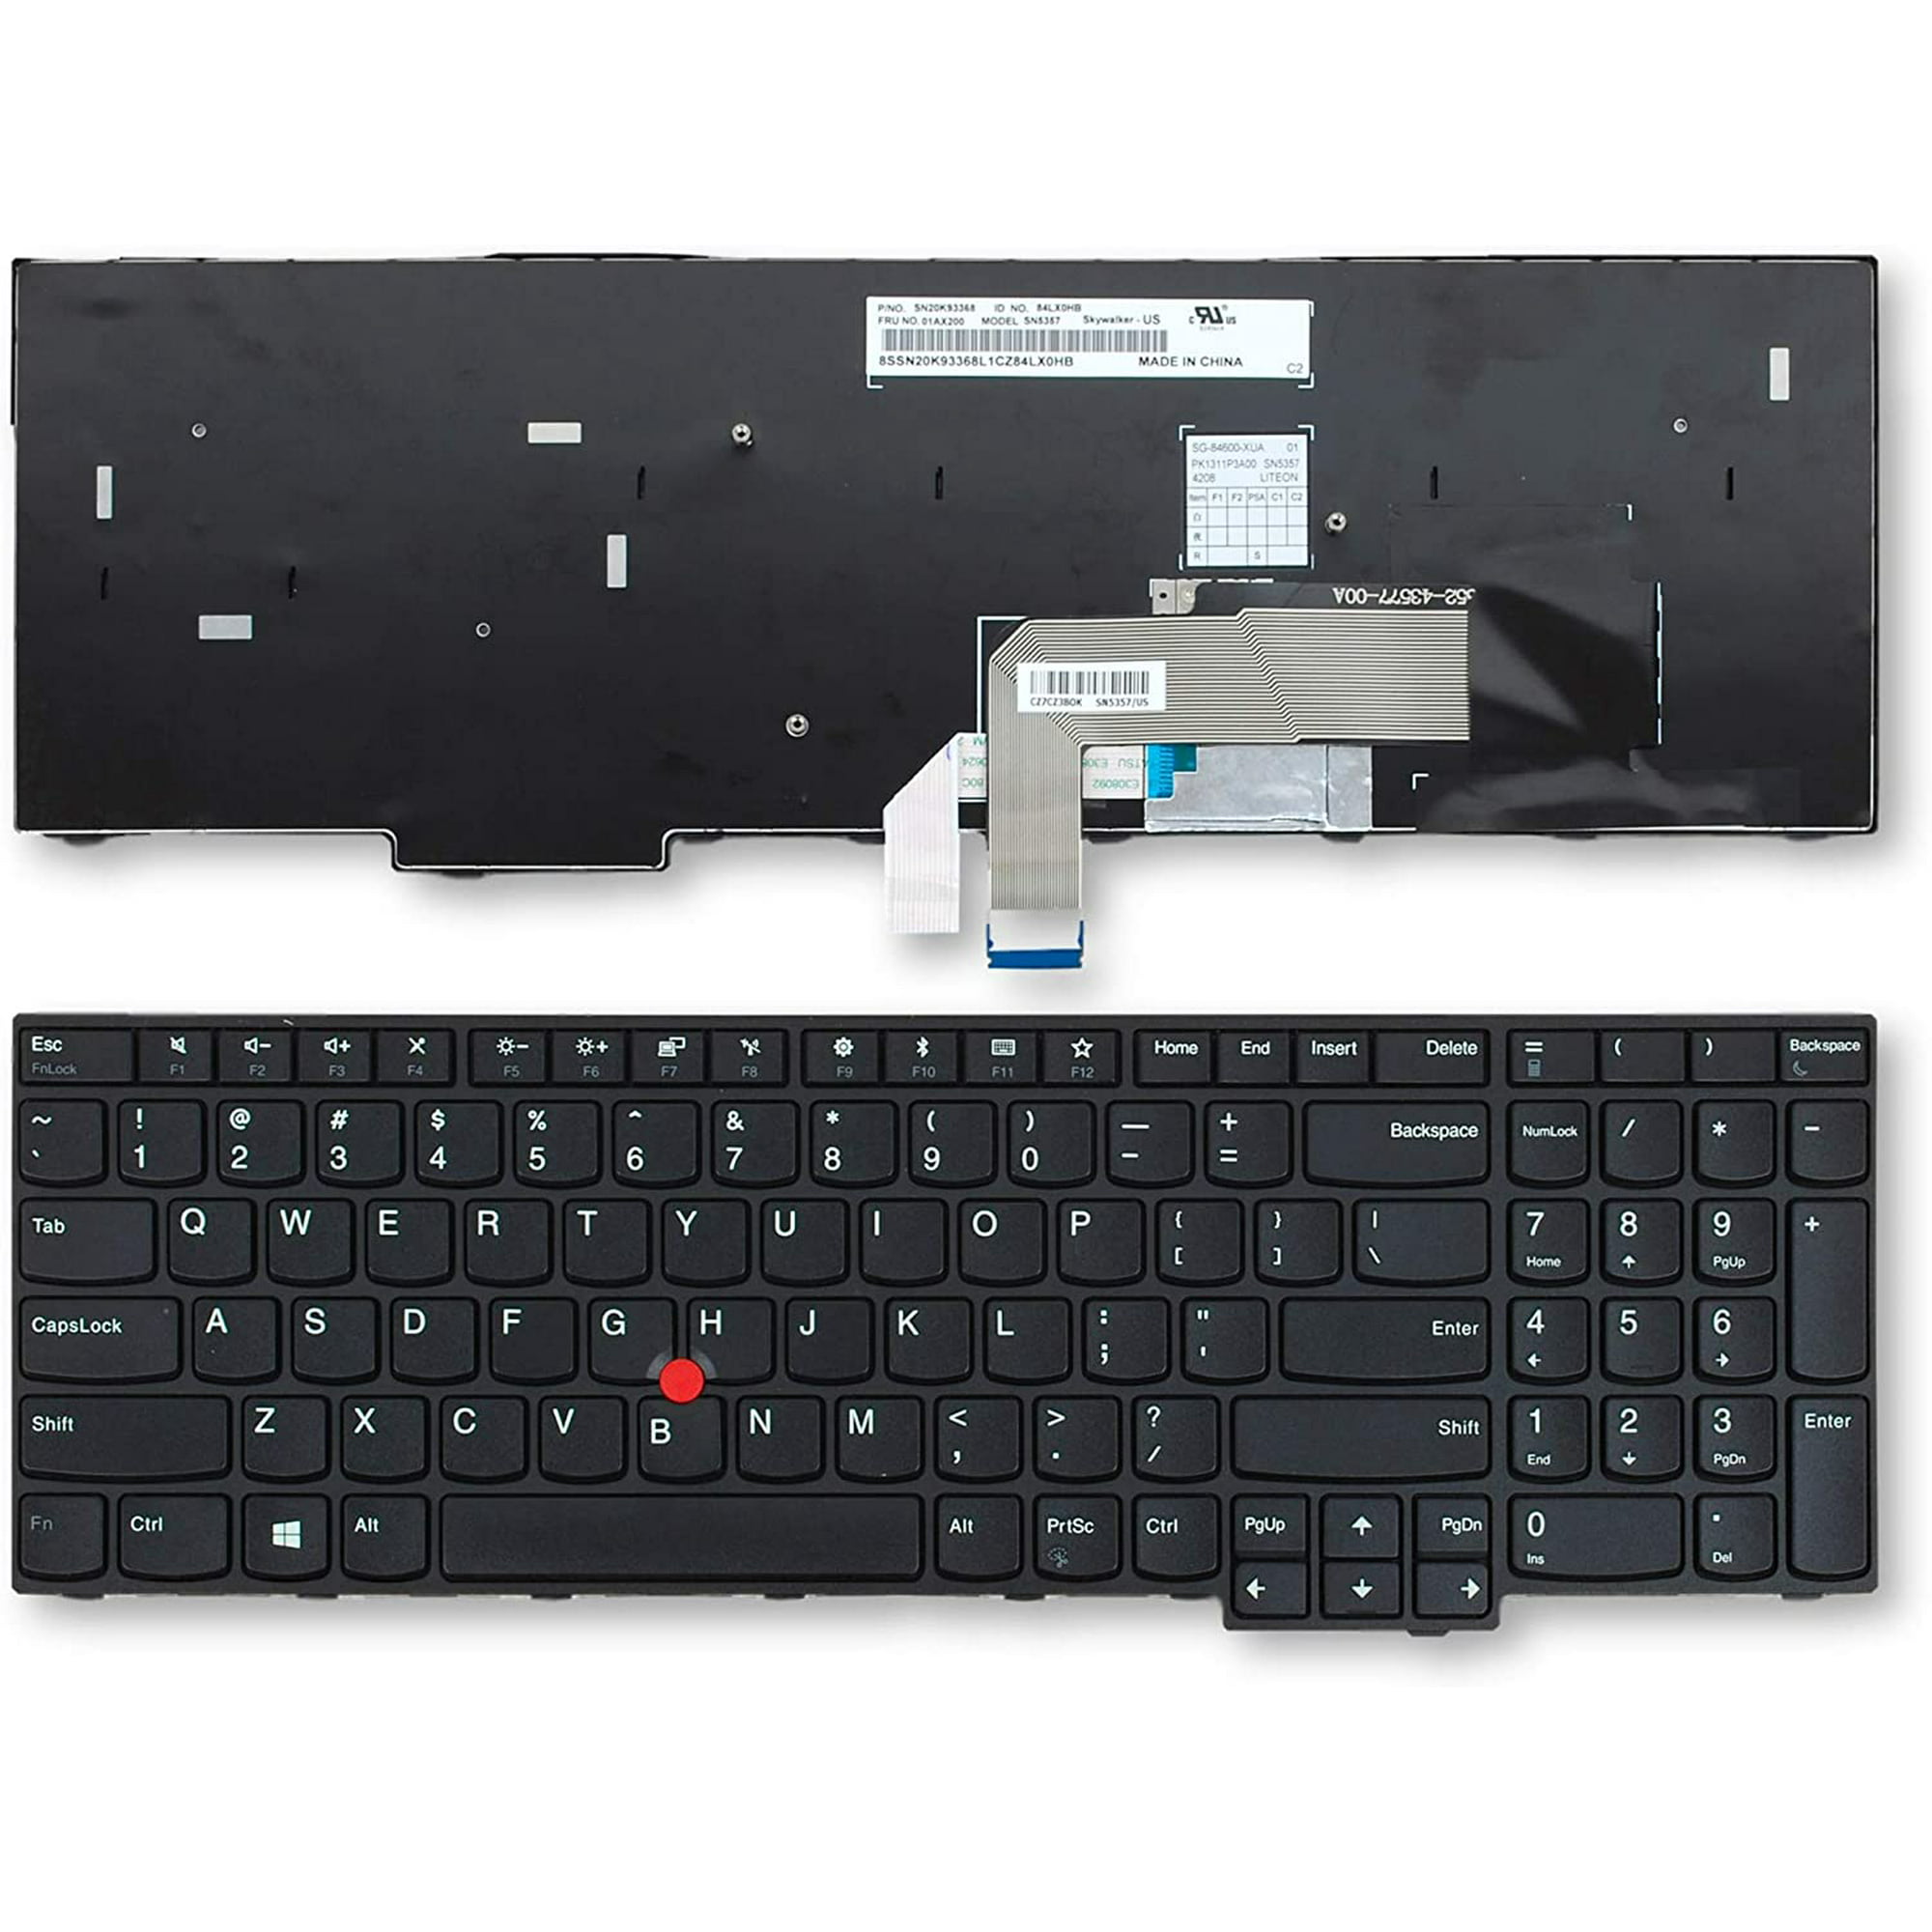 Laptop Replacement Keyboard for Lenovo Thinkpad E570 E570C E575  20H5;20H6;20H7;20H8; 01AX200 01AX160 SN20K93368 01AX120 | Walmart Canada